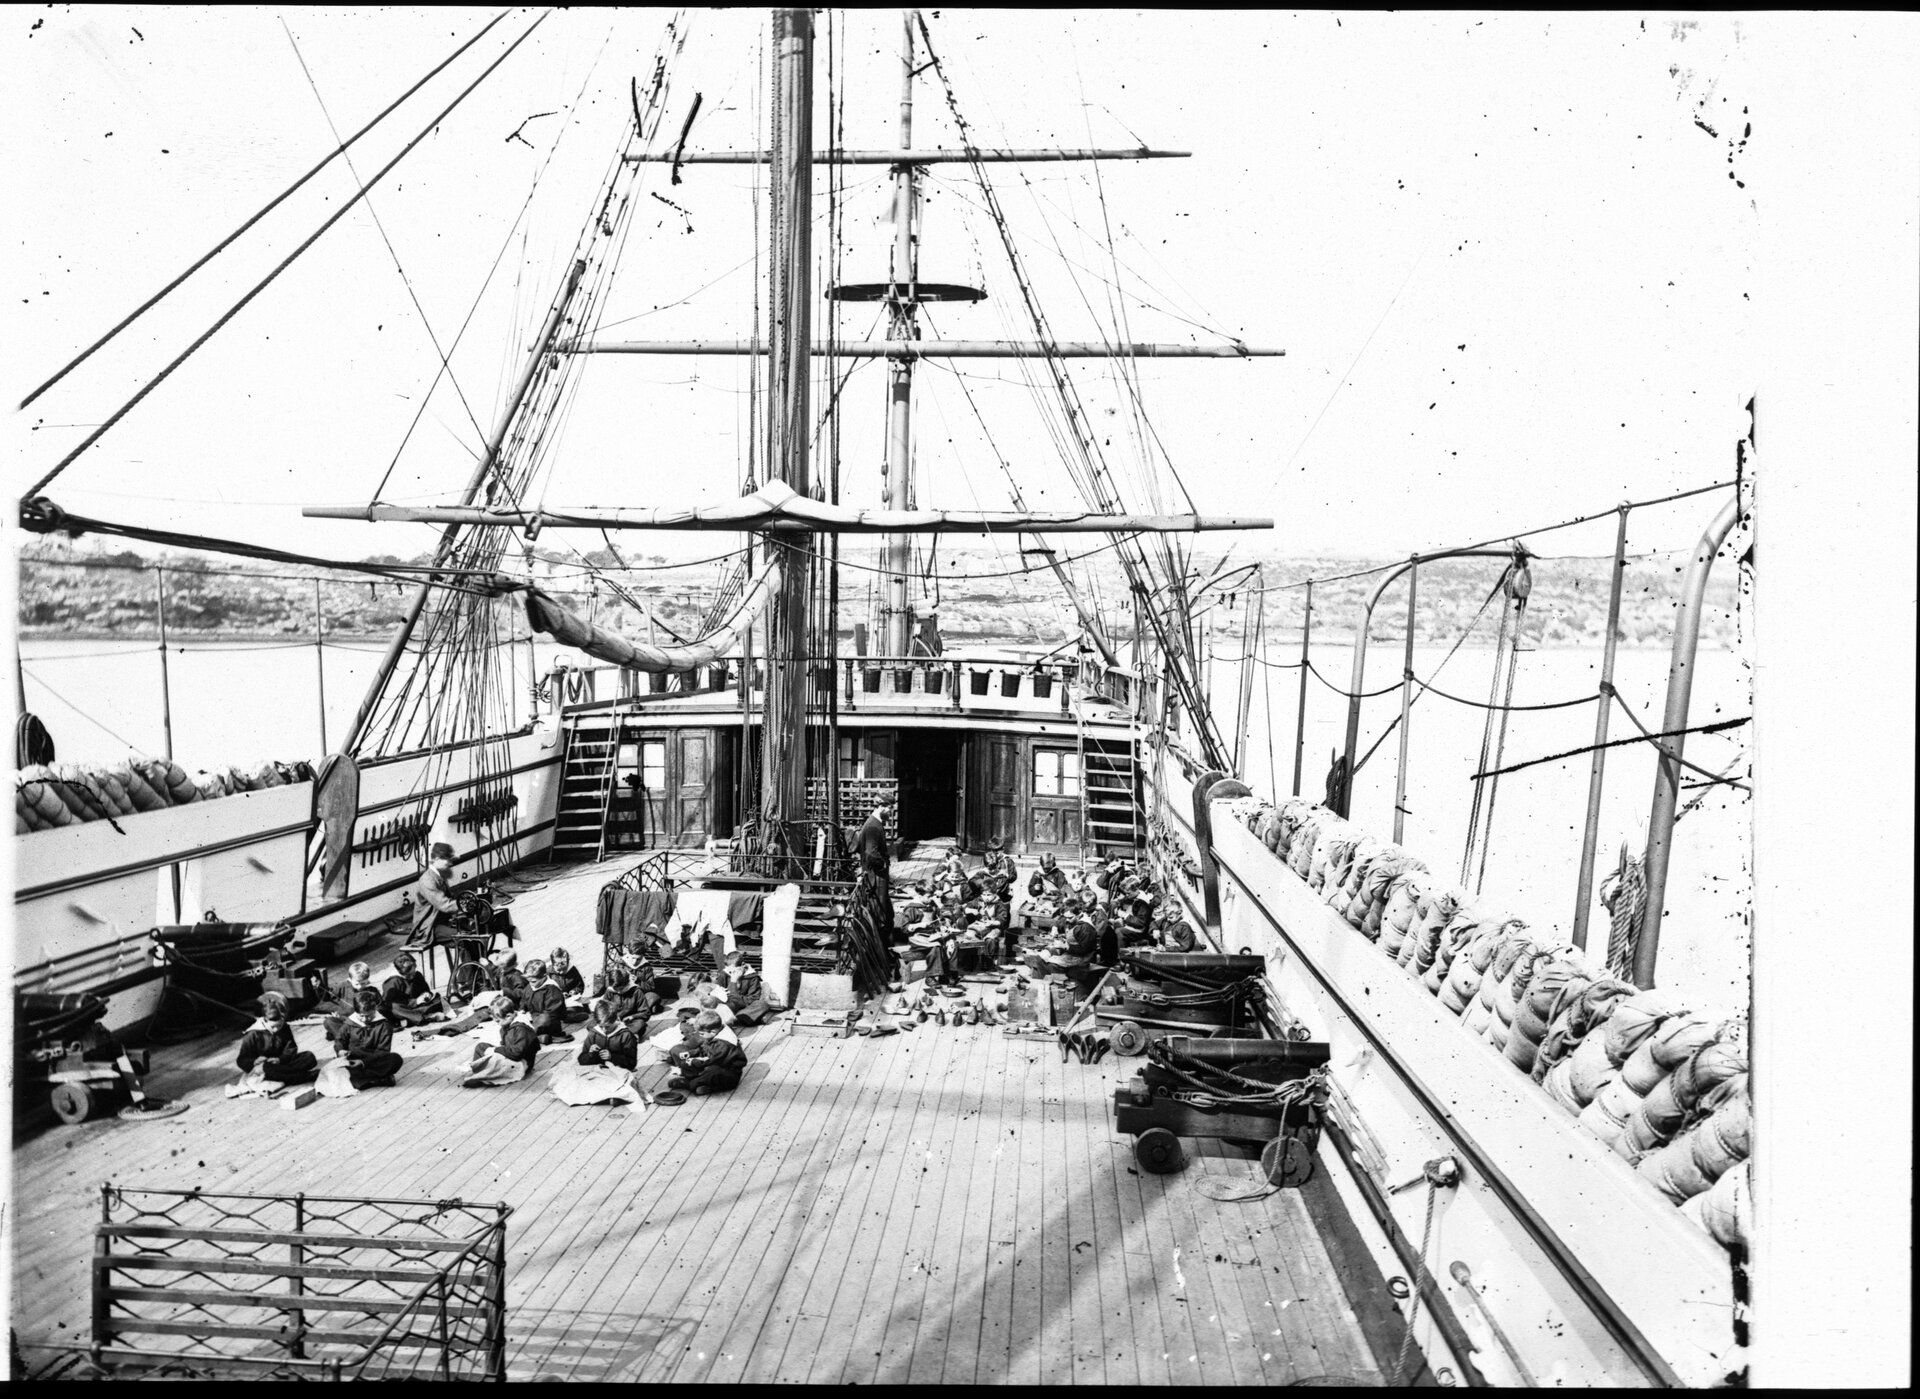 Boys sit cross legged on the deck of a ship with sewing materials while instructors watch on. Cannons line the sides of the deck